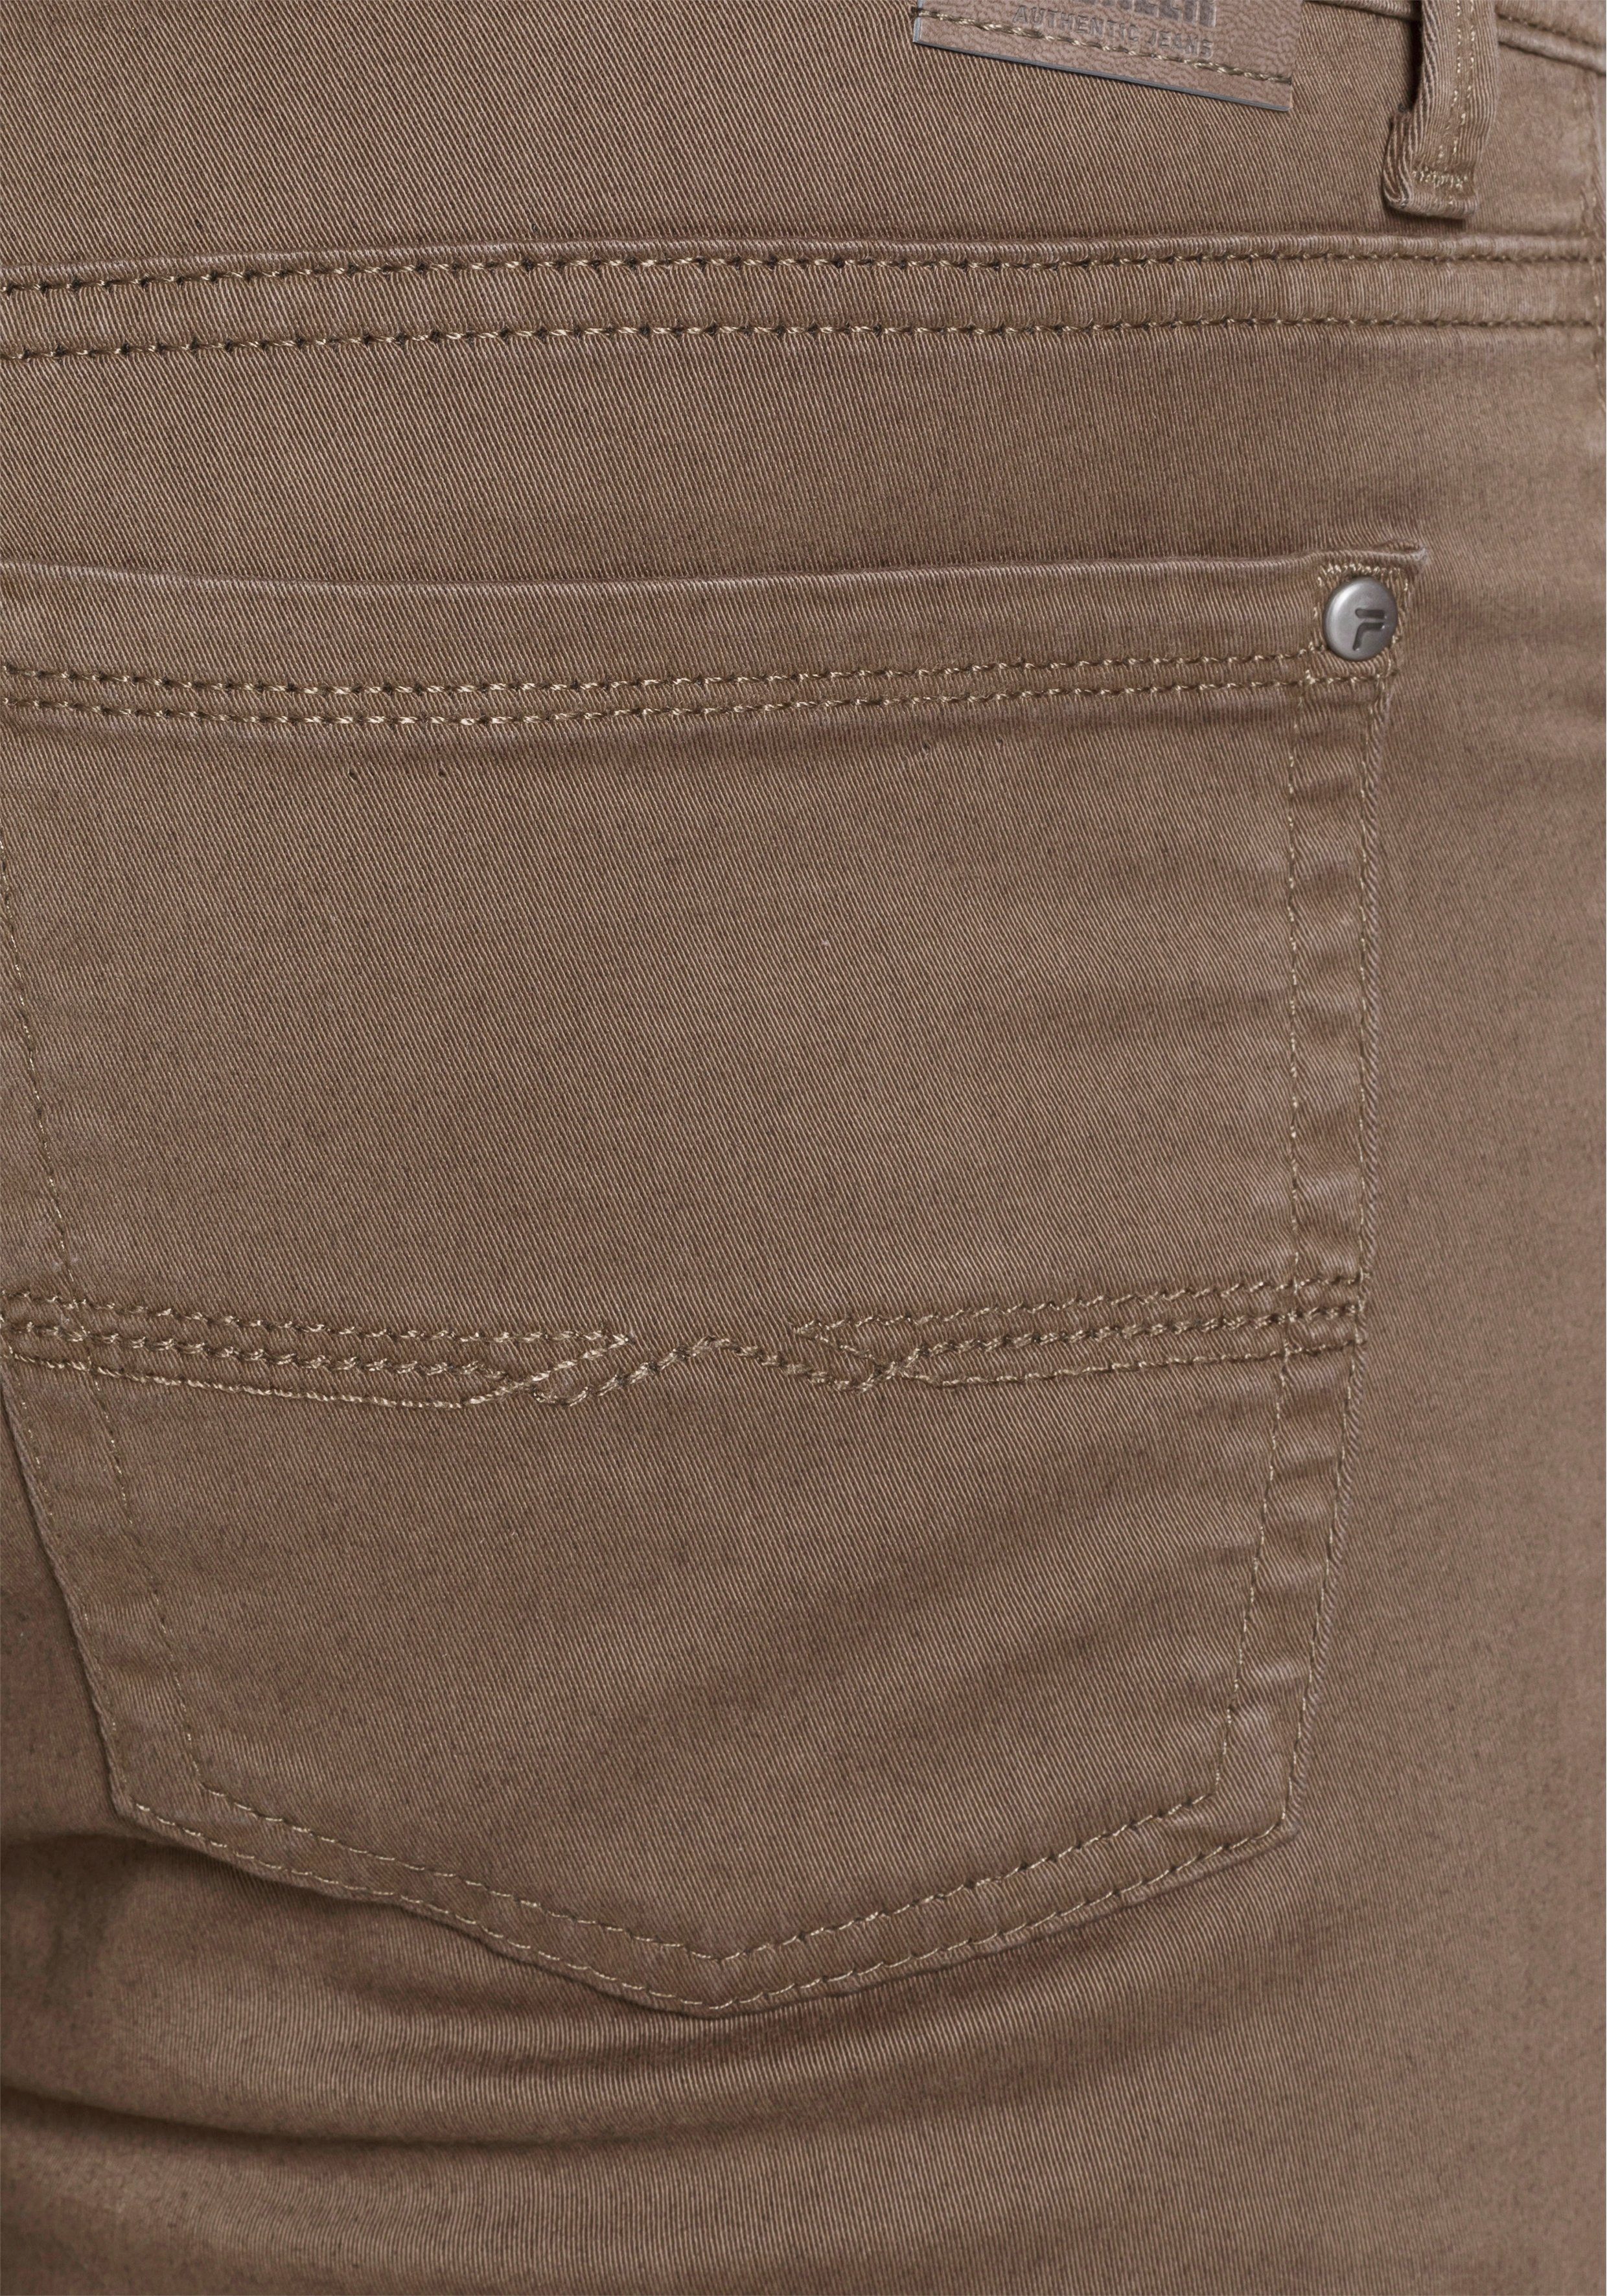 deep Rando Jeans Pioneer taupe Authentic 5-Pocket-Hose Thermolite